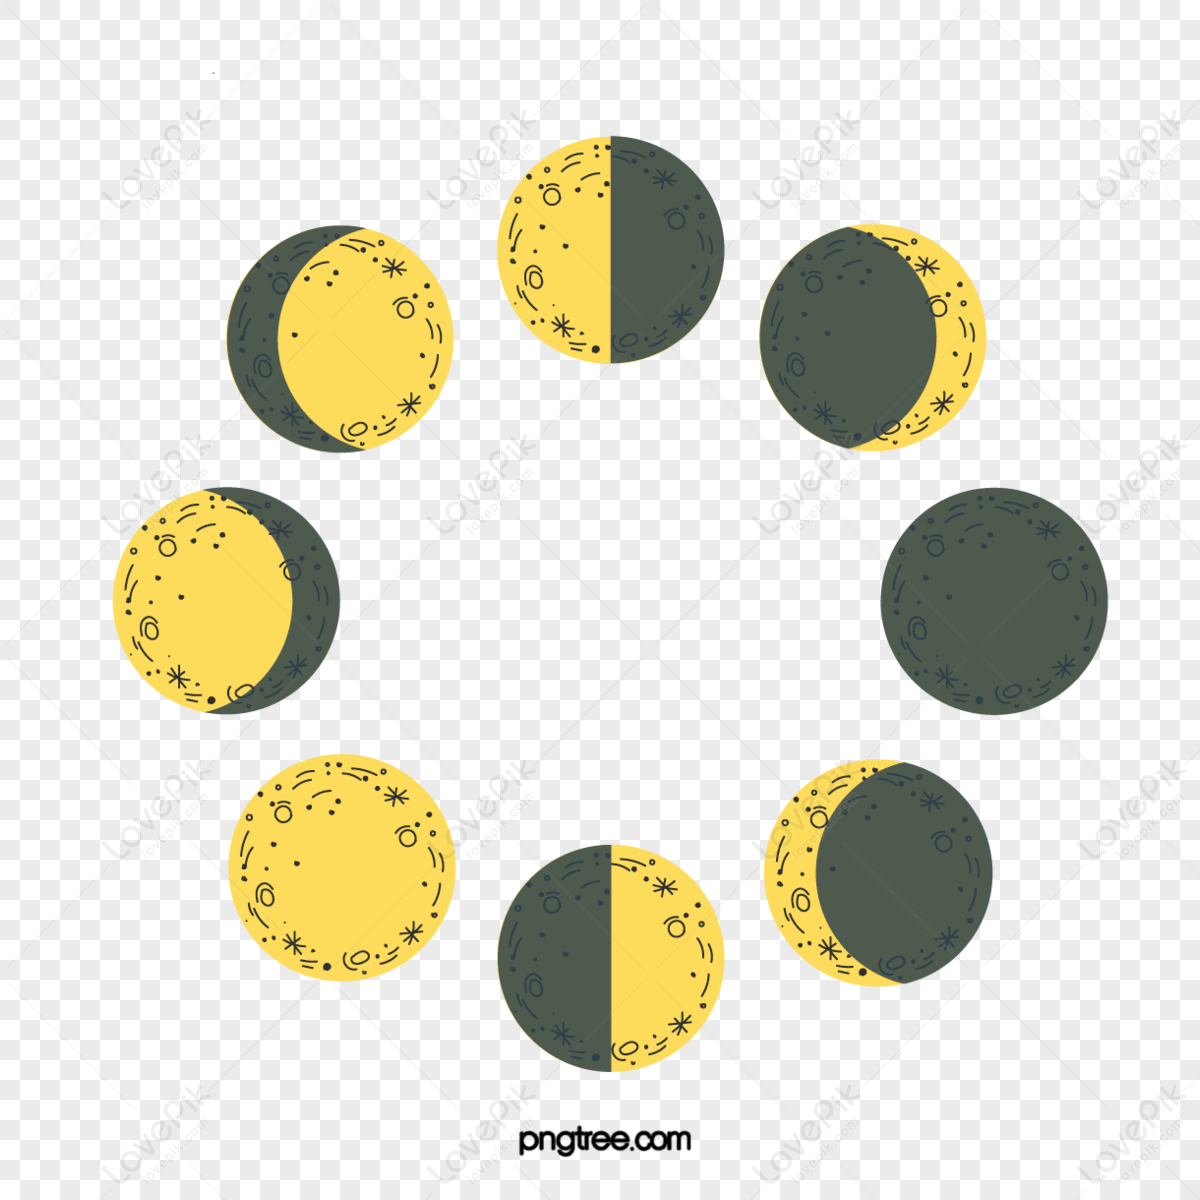 Moon Phase PNG Images With Transparent Background